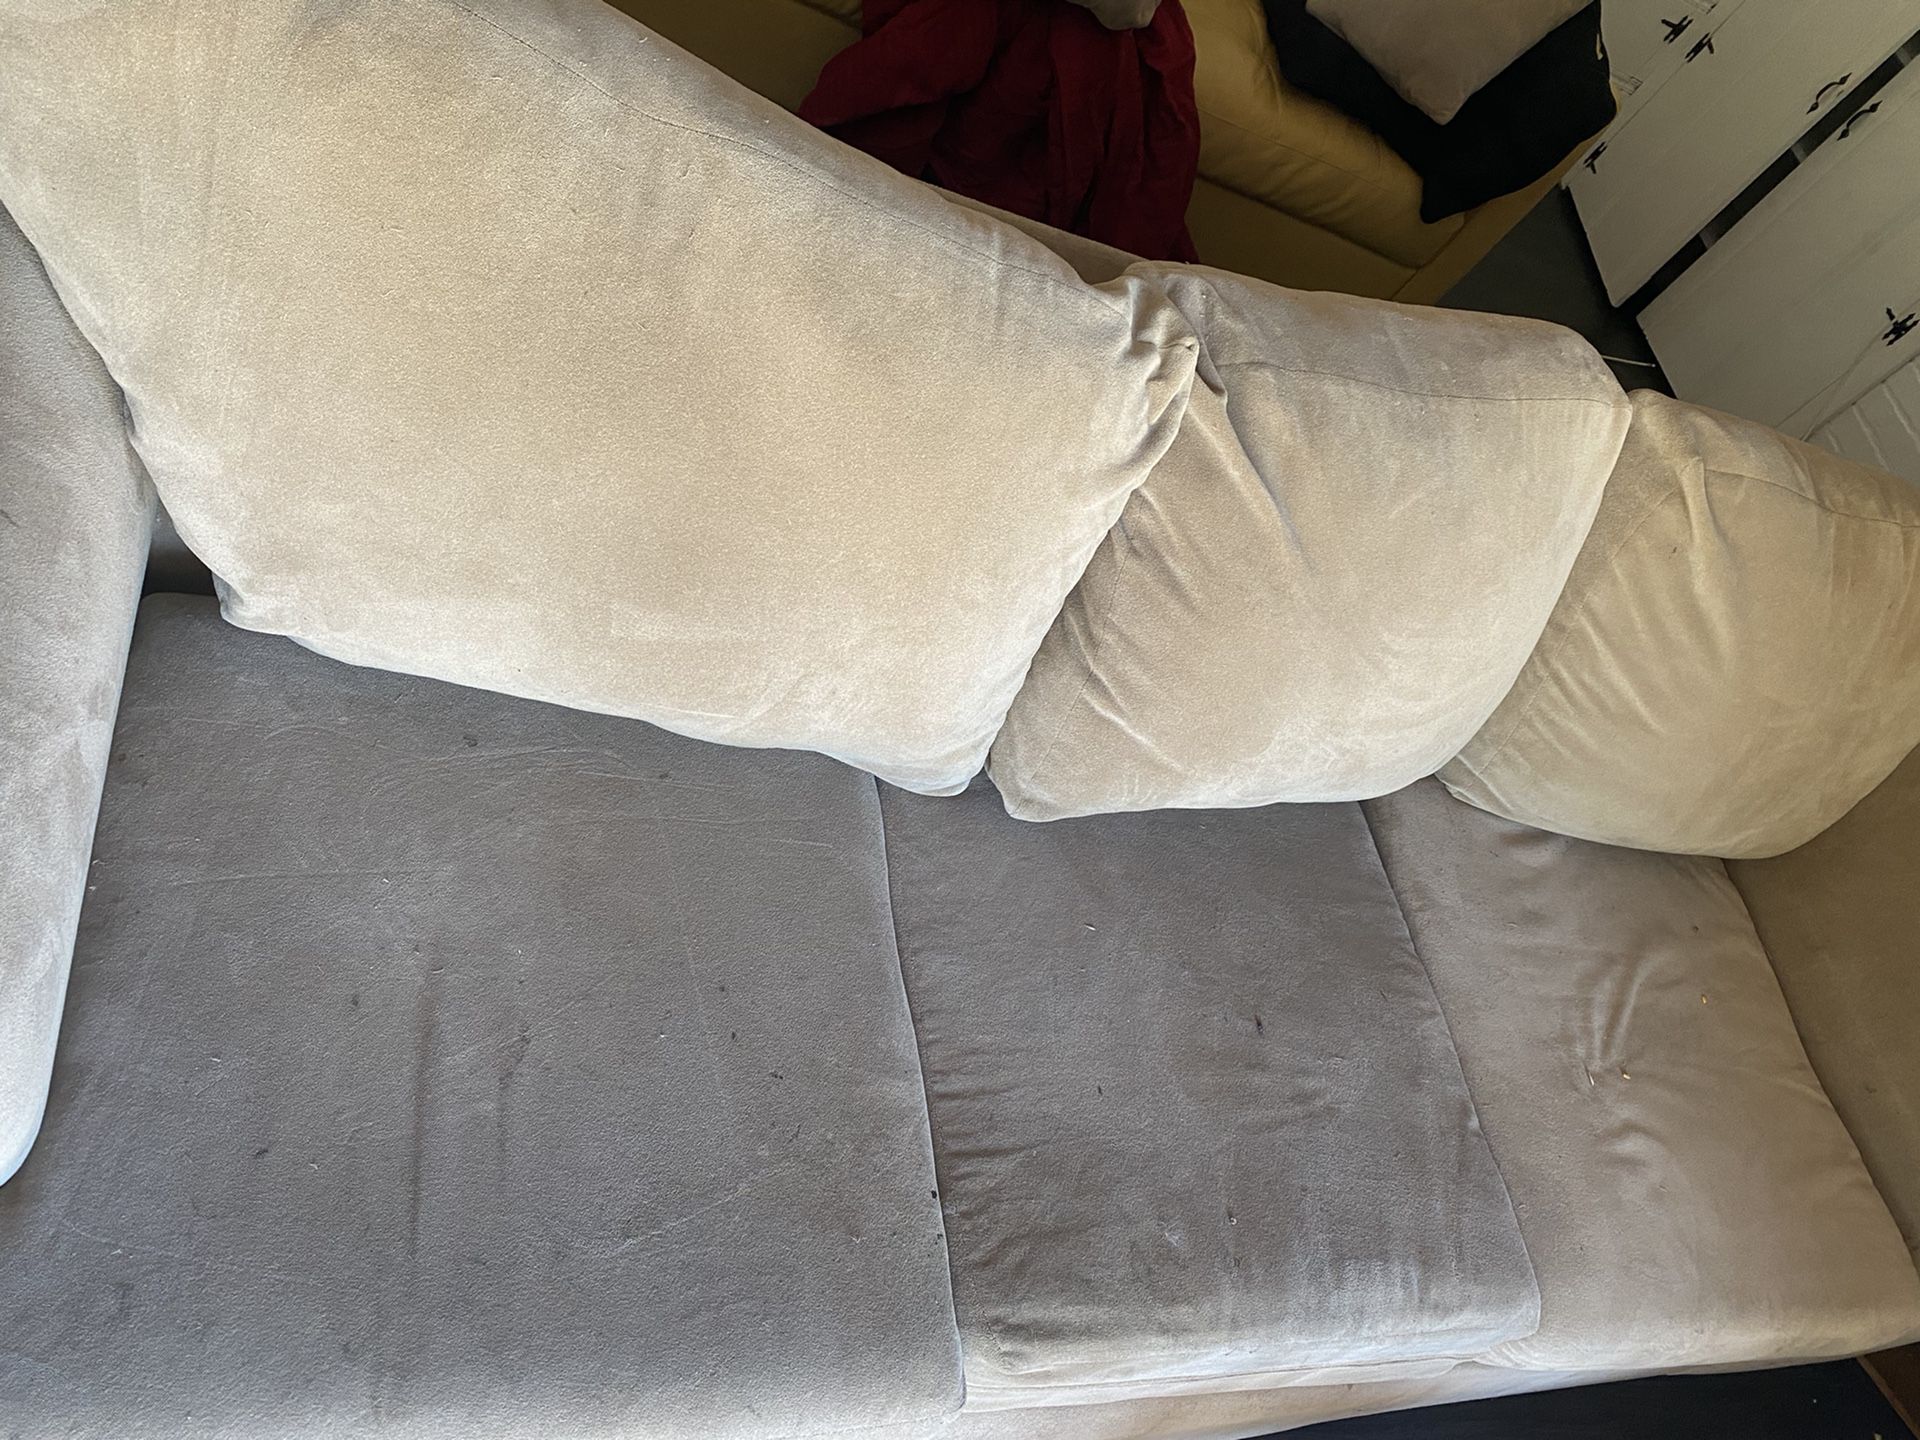 FREE. —-Two piece sectional couch